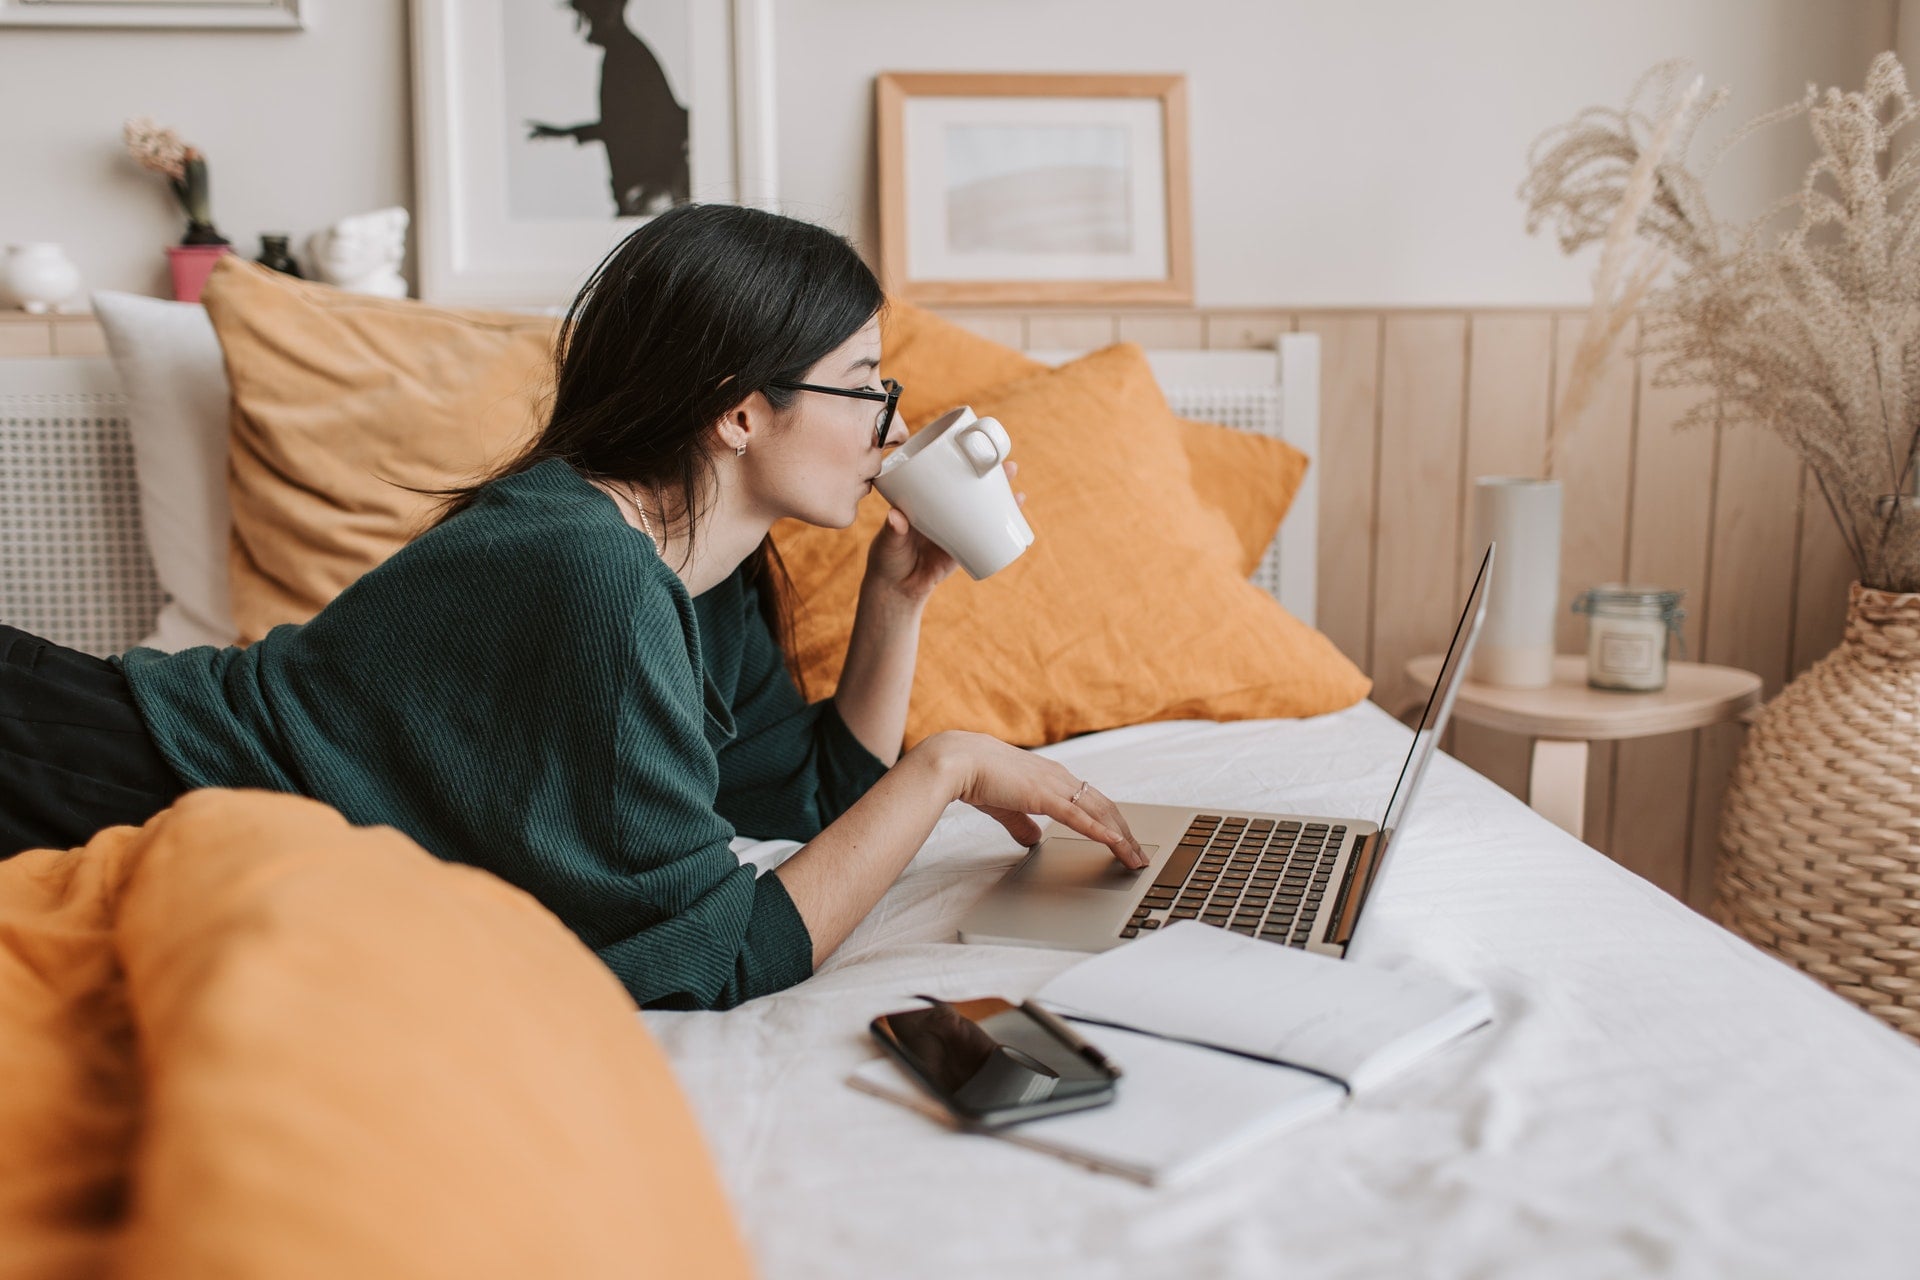 Get Out Of Bed 7 Tips To Succeed In Your Online Classes This Fall Popsugar Smart Living Photo 3